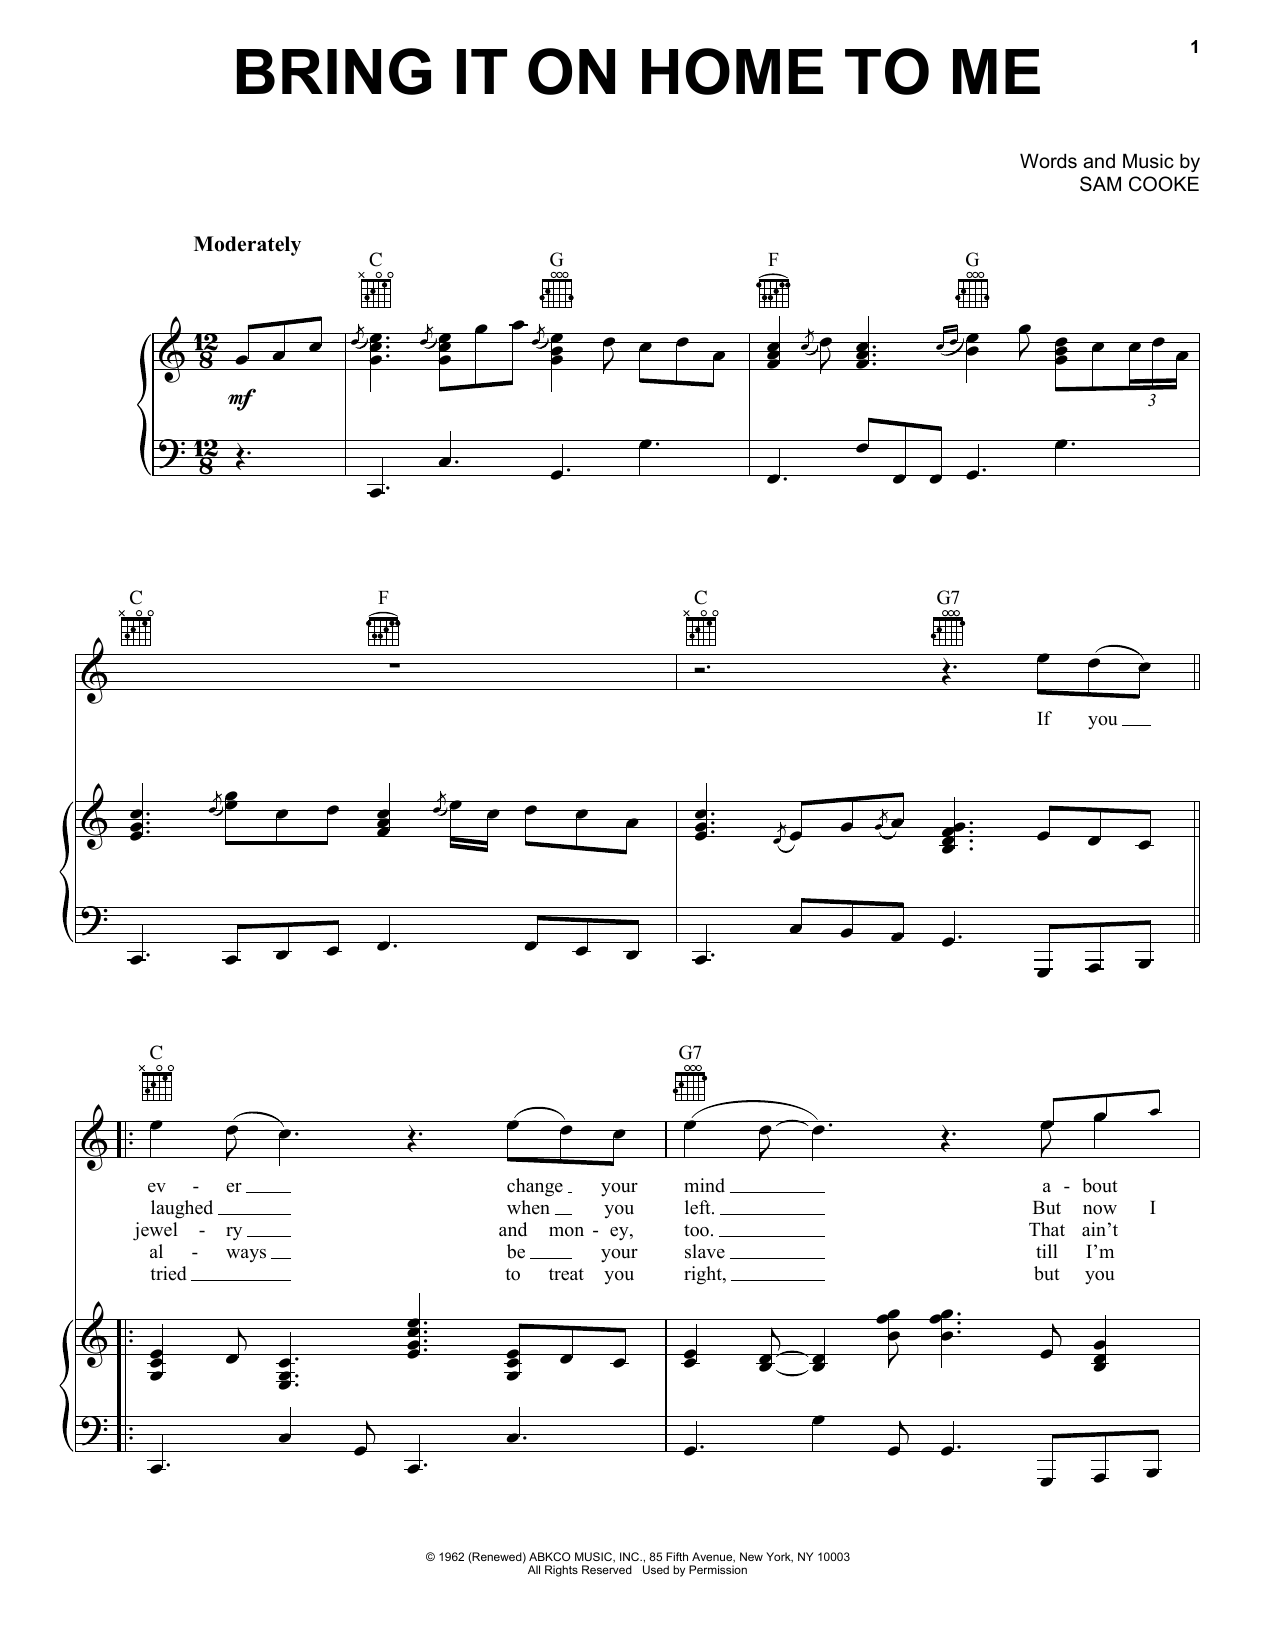 Download Sam Cooke Bring It On Home To Me Sheet Music